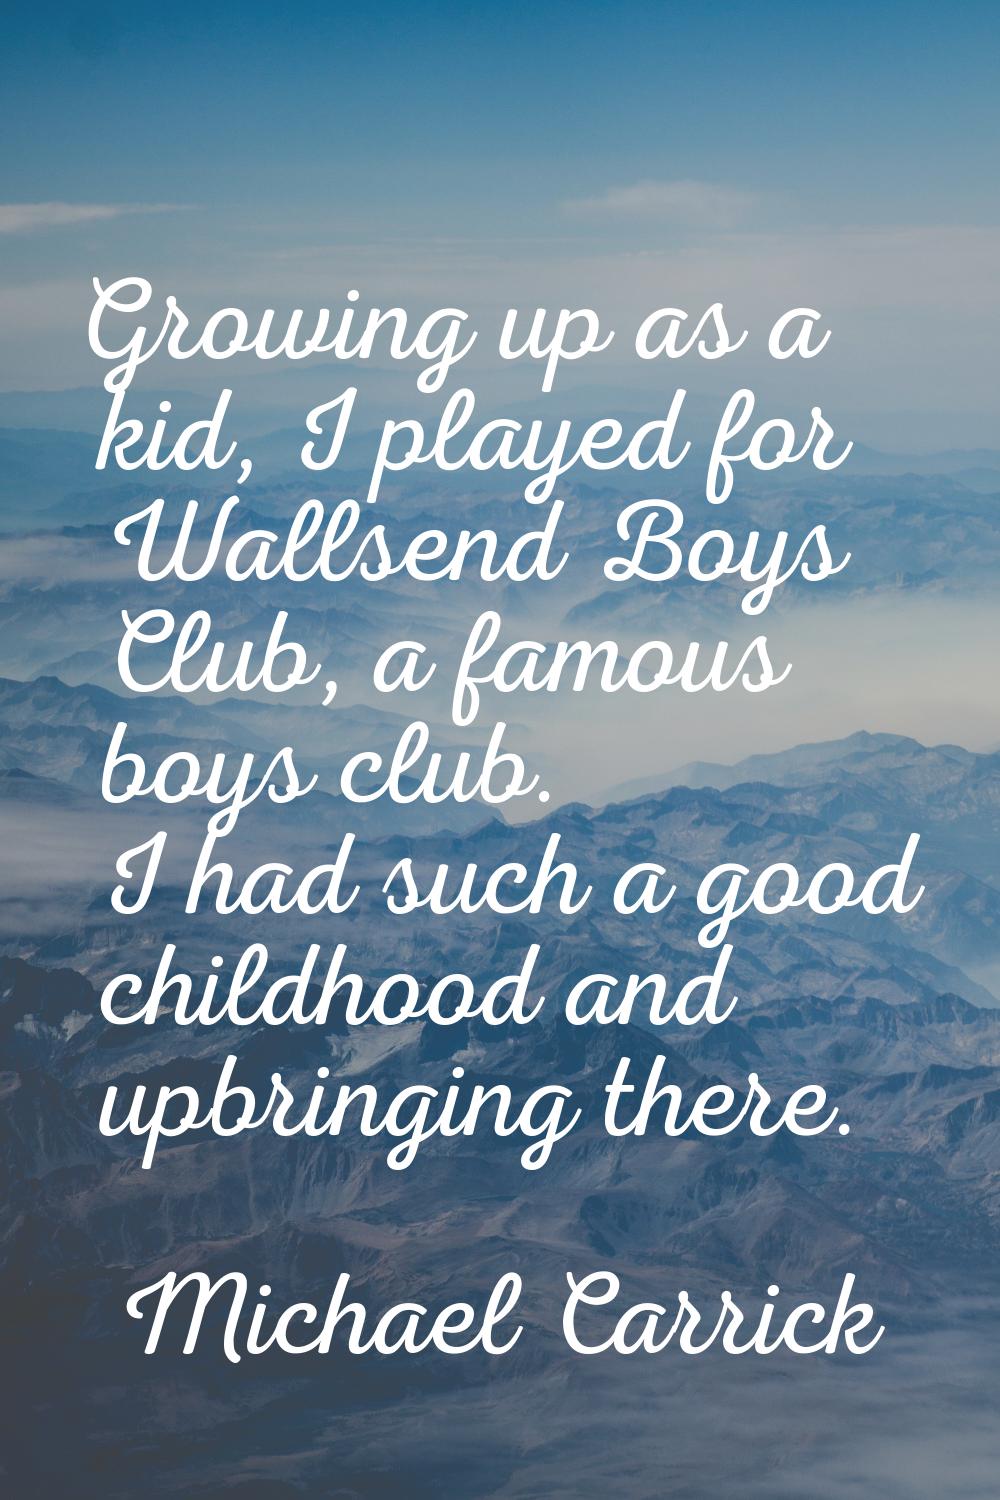 Growing up as a kid, I played for Wallsend Boys Club, a famous boys club. I had such a good childho